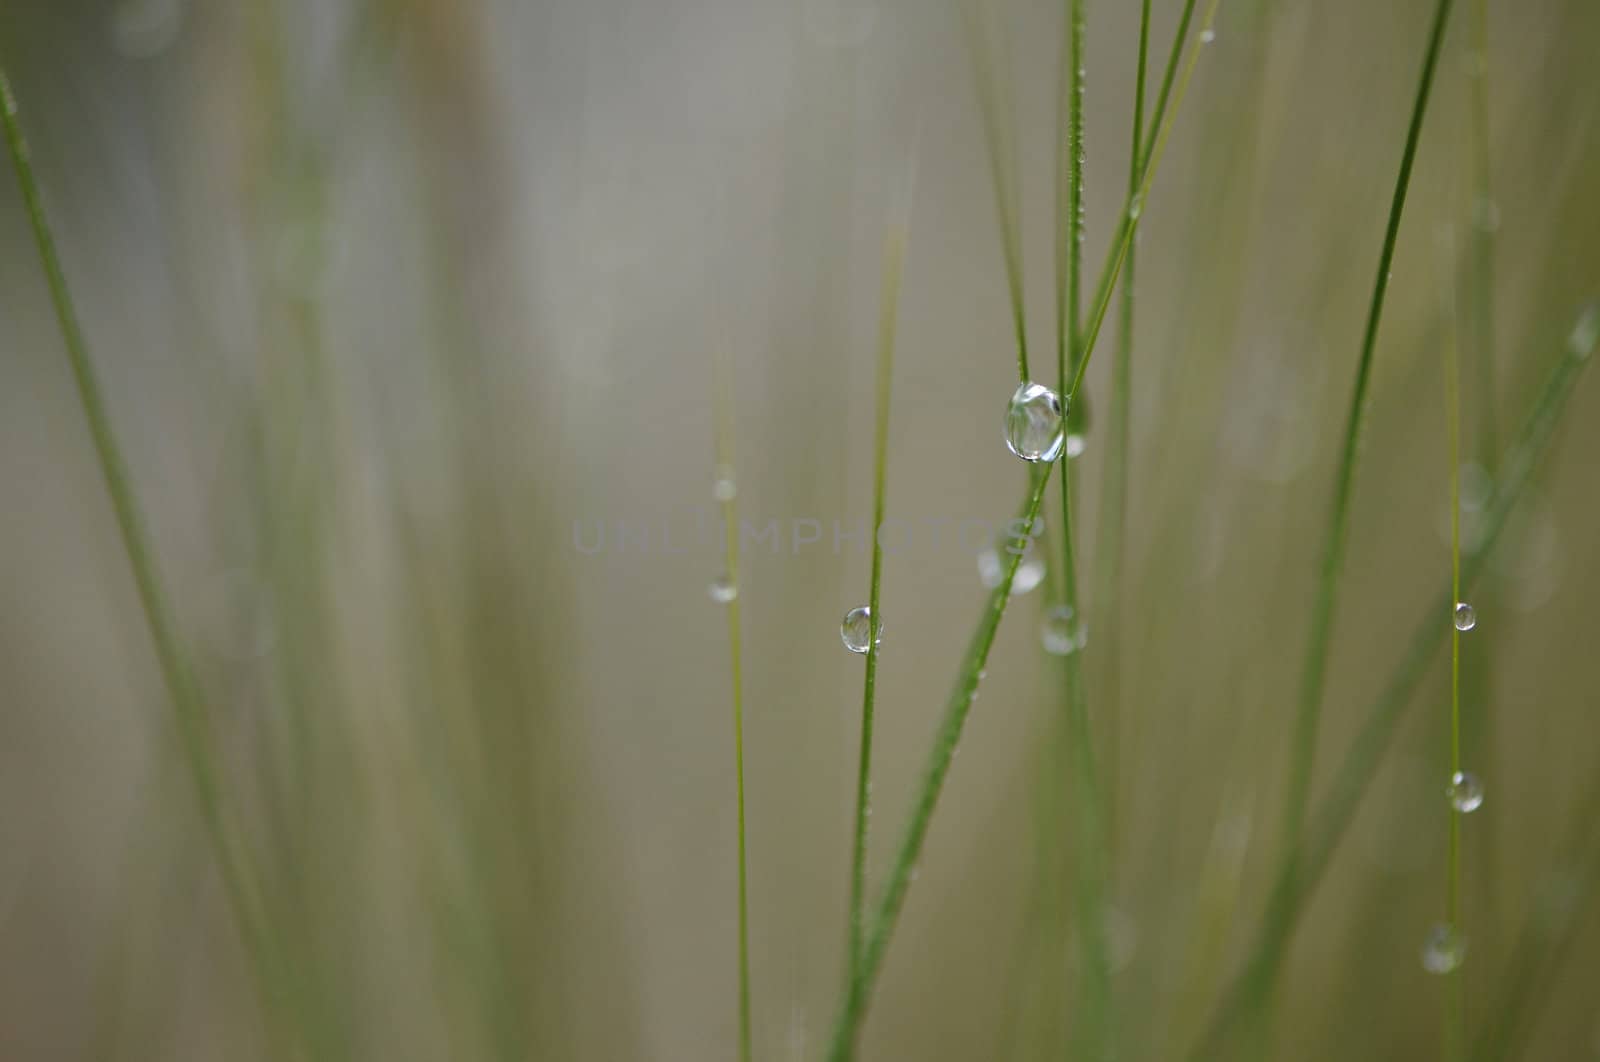 Some Water Droplets on Grass Stems by shkyo30